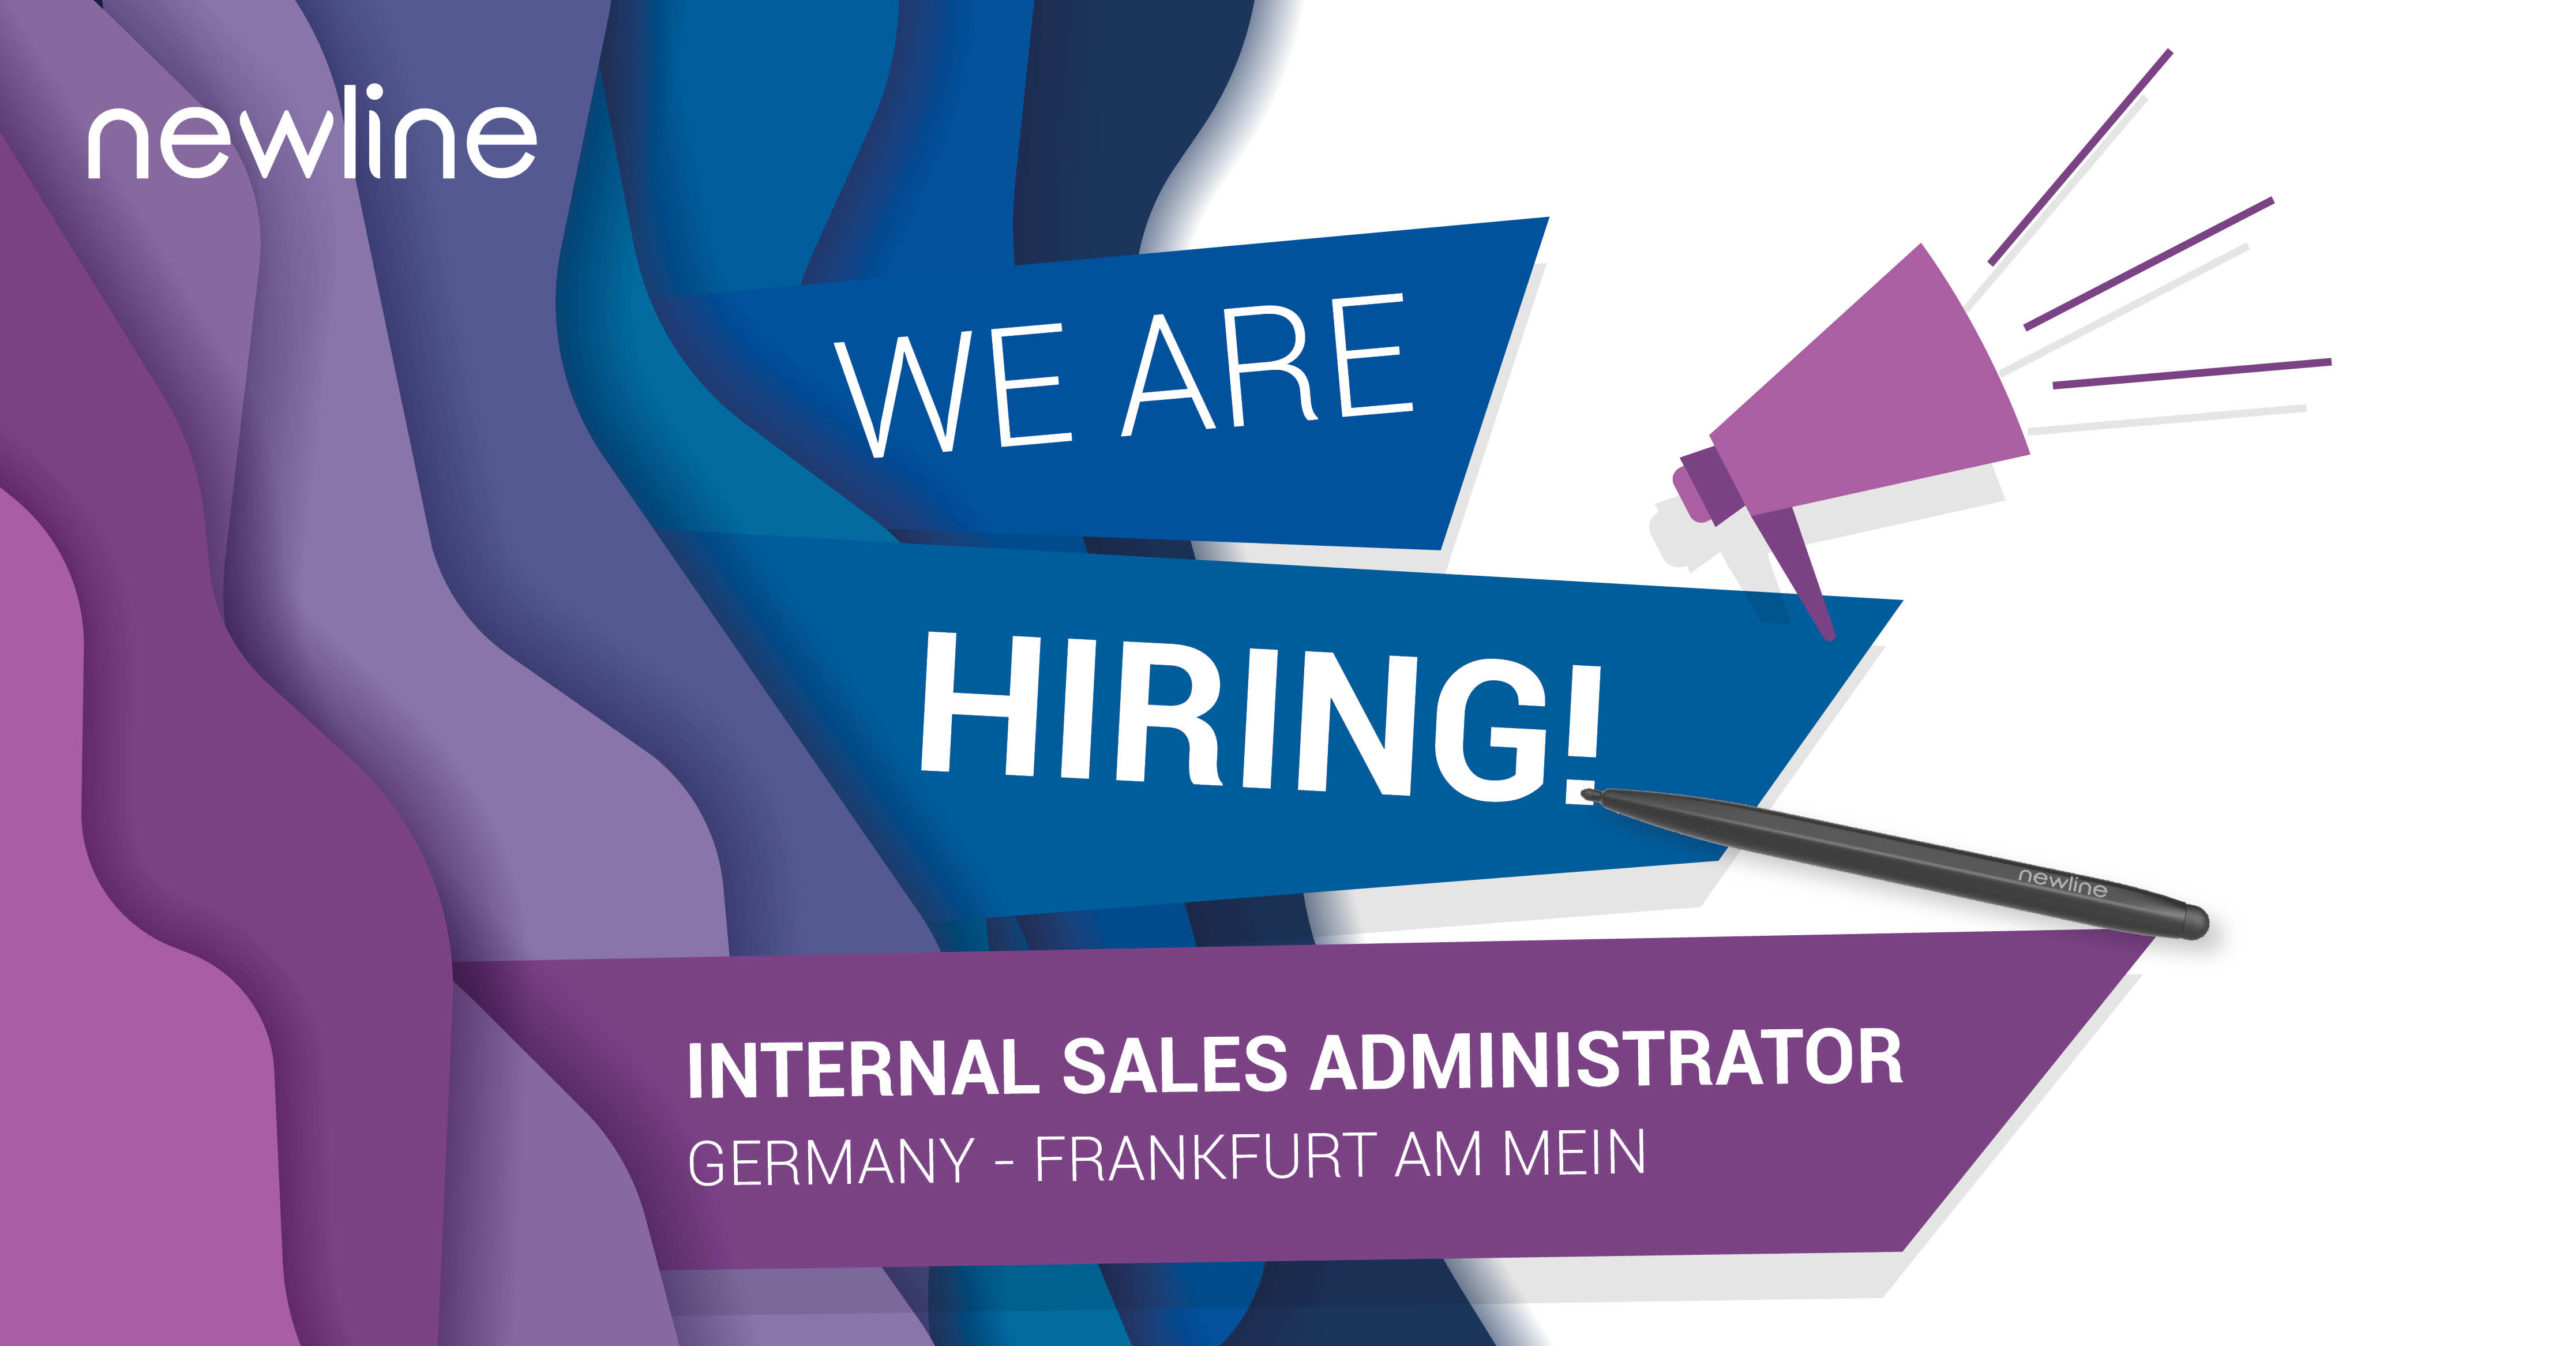 You are currently viewing Newline is Hiring! Internal Sales Administrator